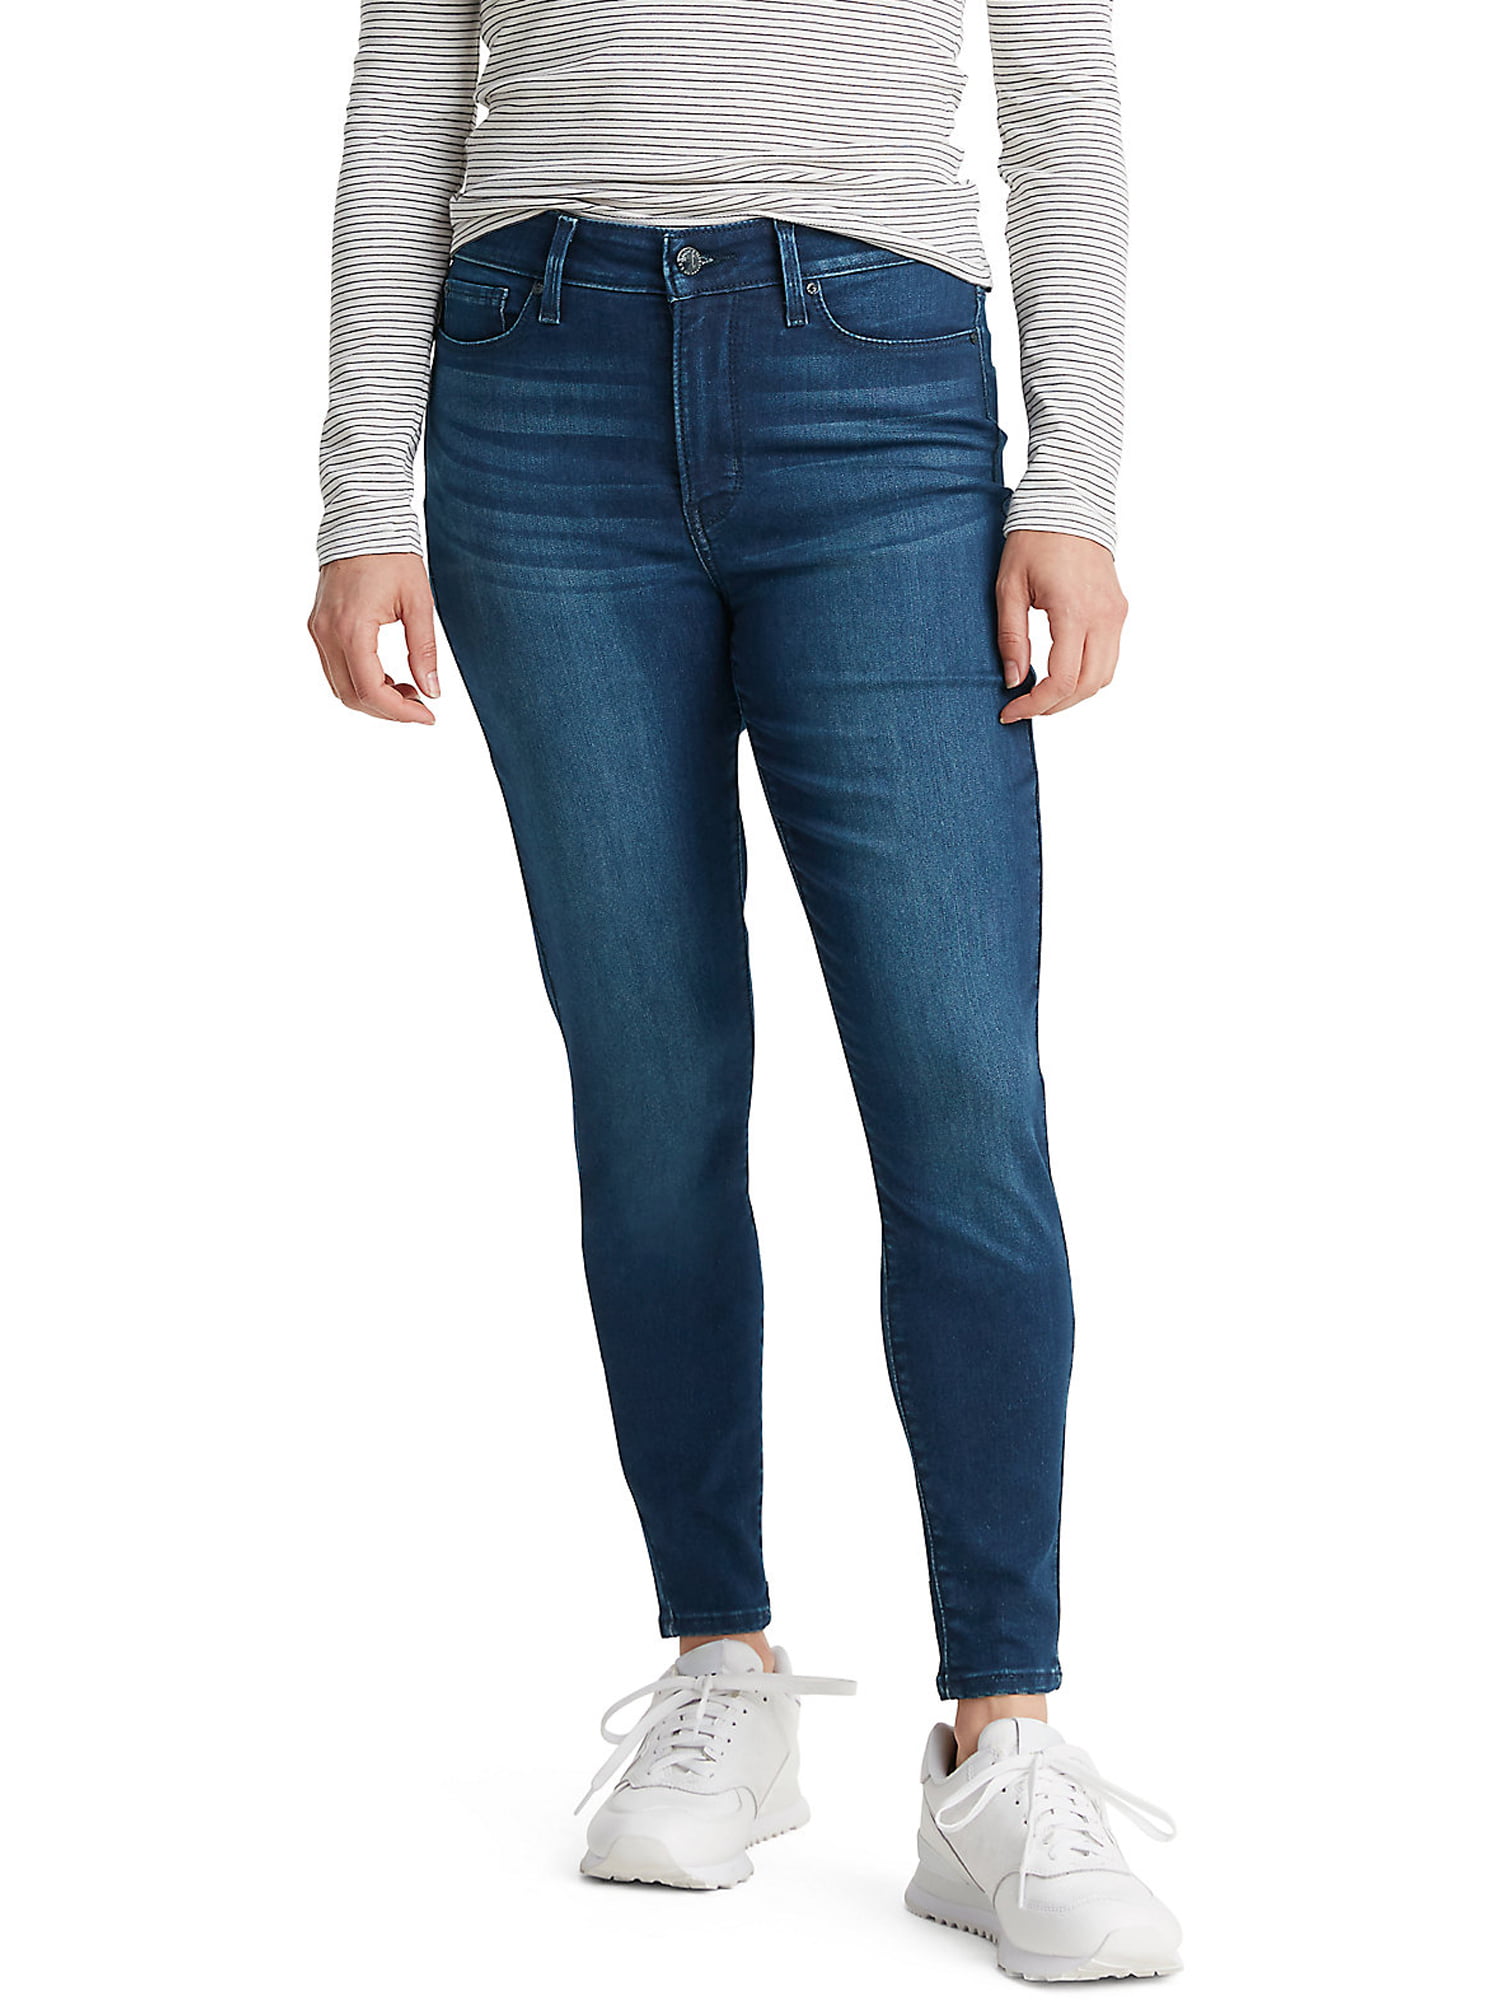 jeans that are not tight